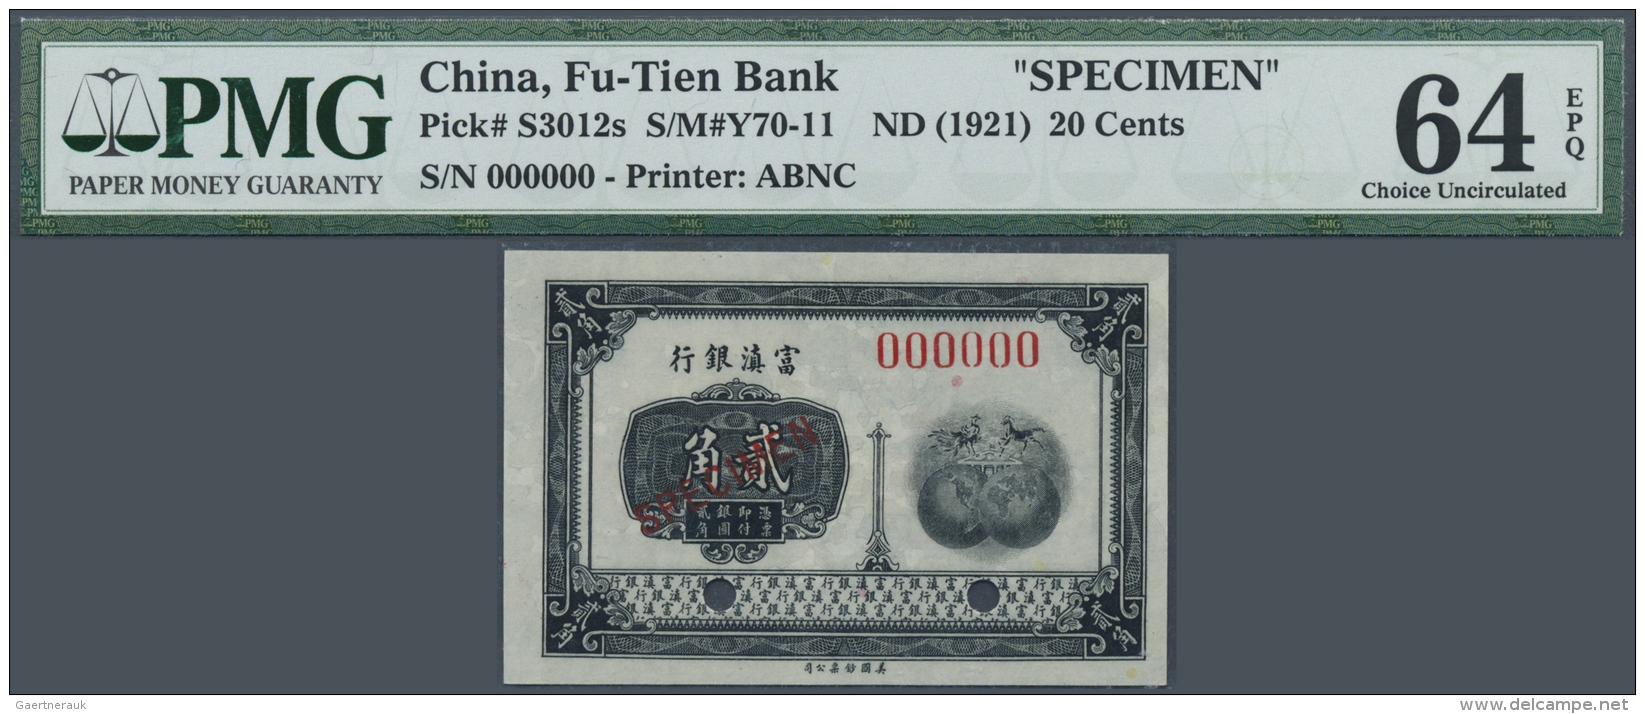 China: Fu-Tien Bank 20 Cents ND(1921) Specimen P. S3012s, Condition: PMG Graded 64 Choice UNC EPQ. - China